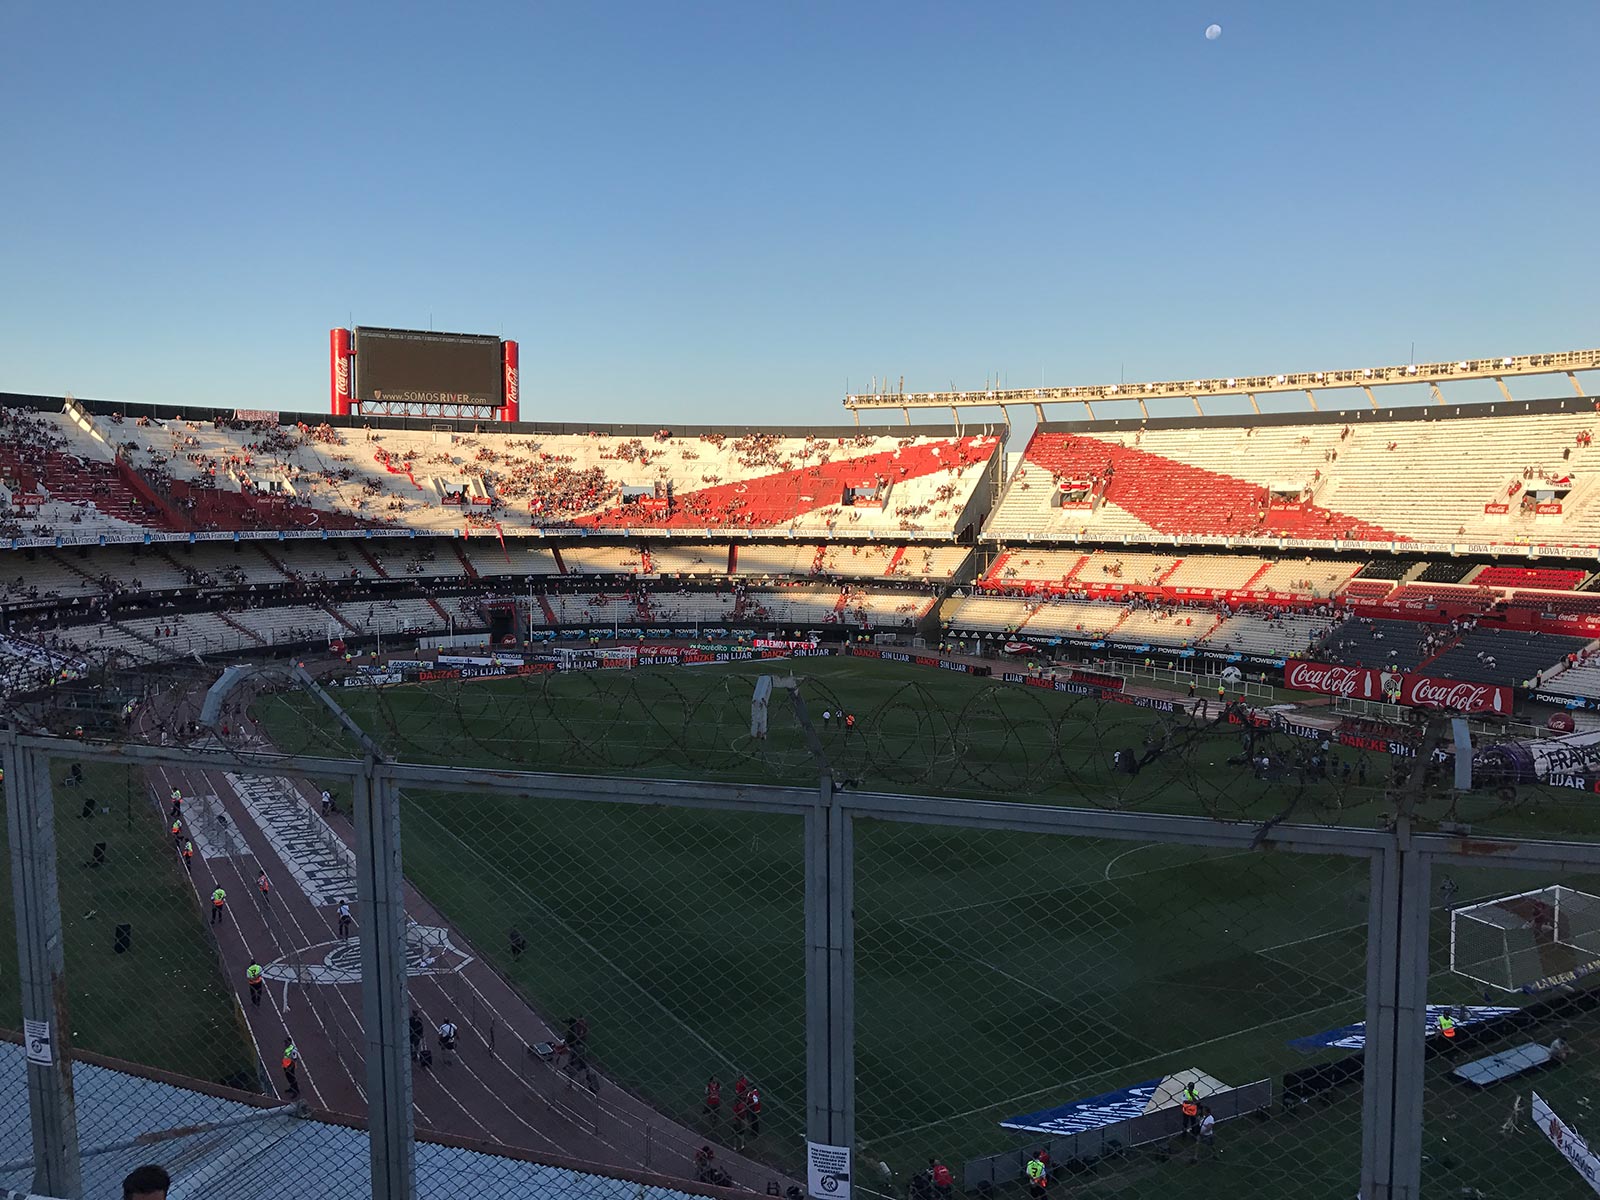 Inside the Estadio Monumental football derby in Buenos Aires. The biggest derby in the world